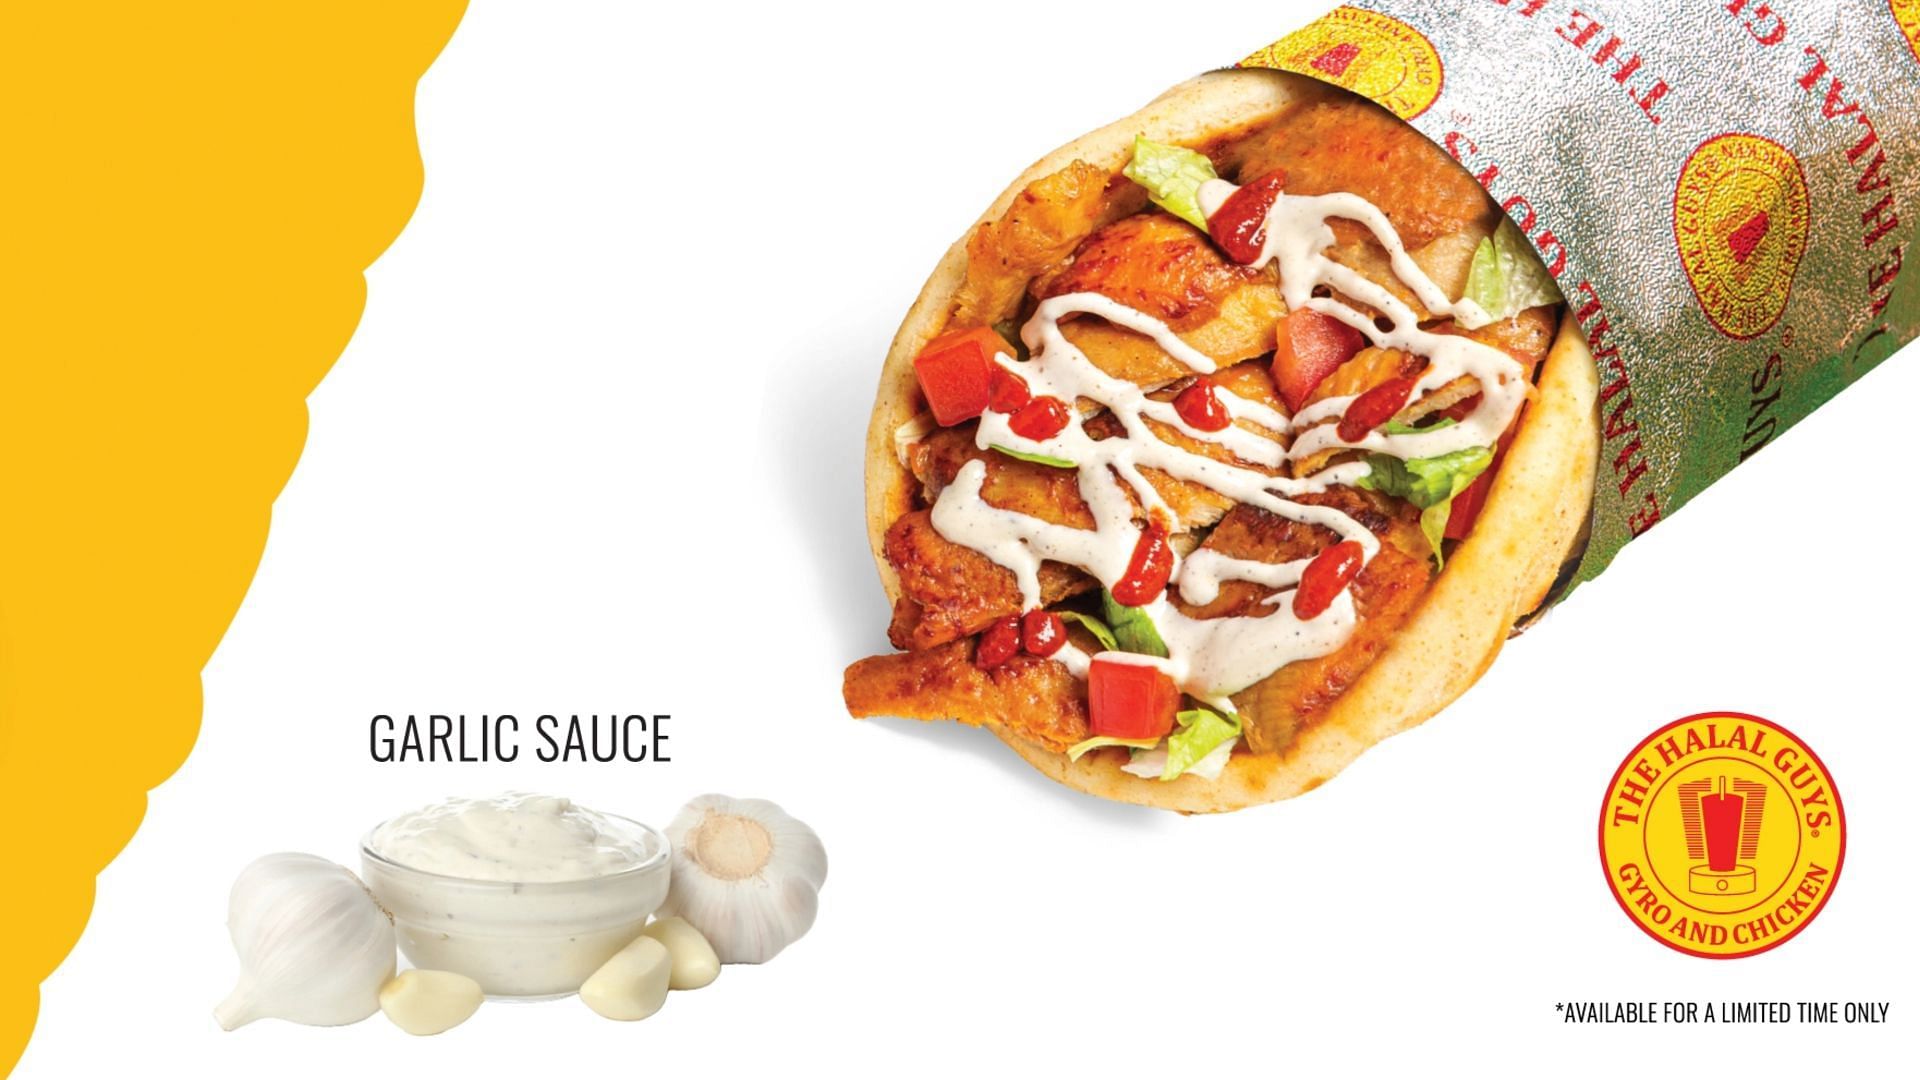 The Chicken Shawarma Sandwich is served with a free side of spicy garlic sauce (Image via The Halal Guys)